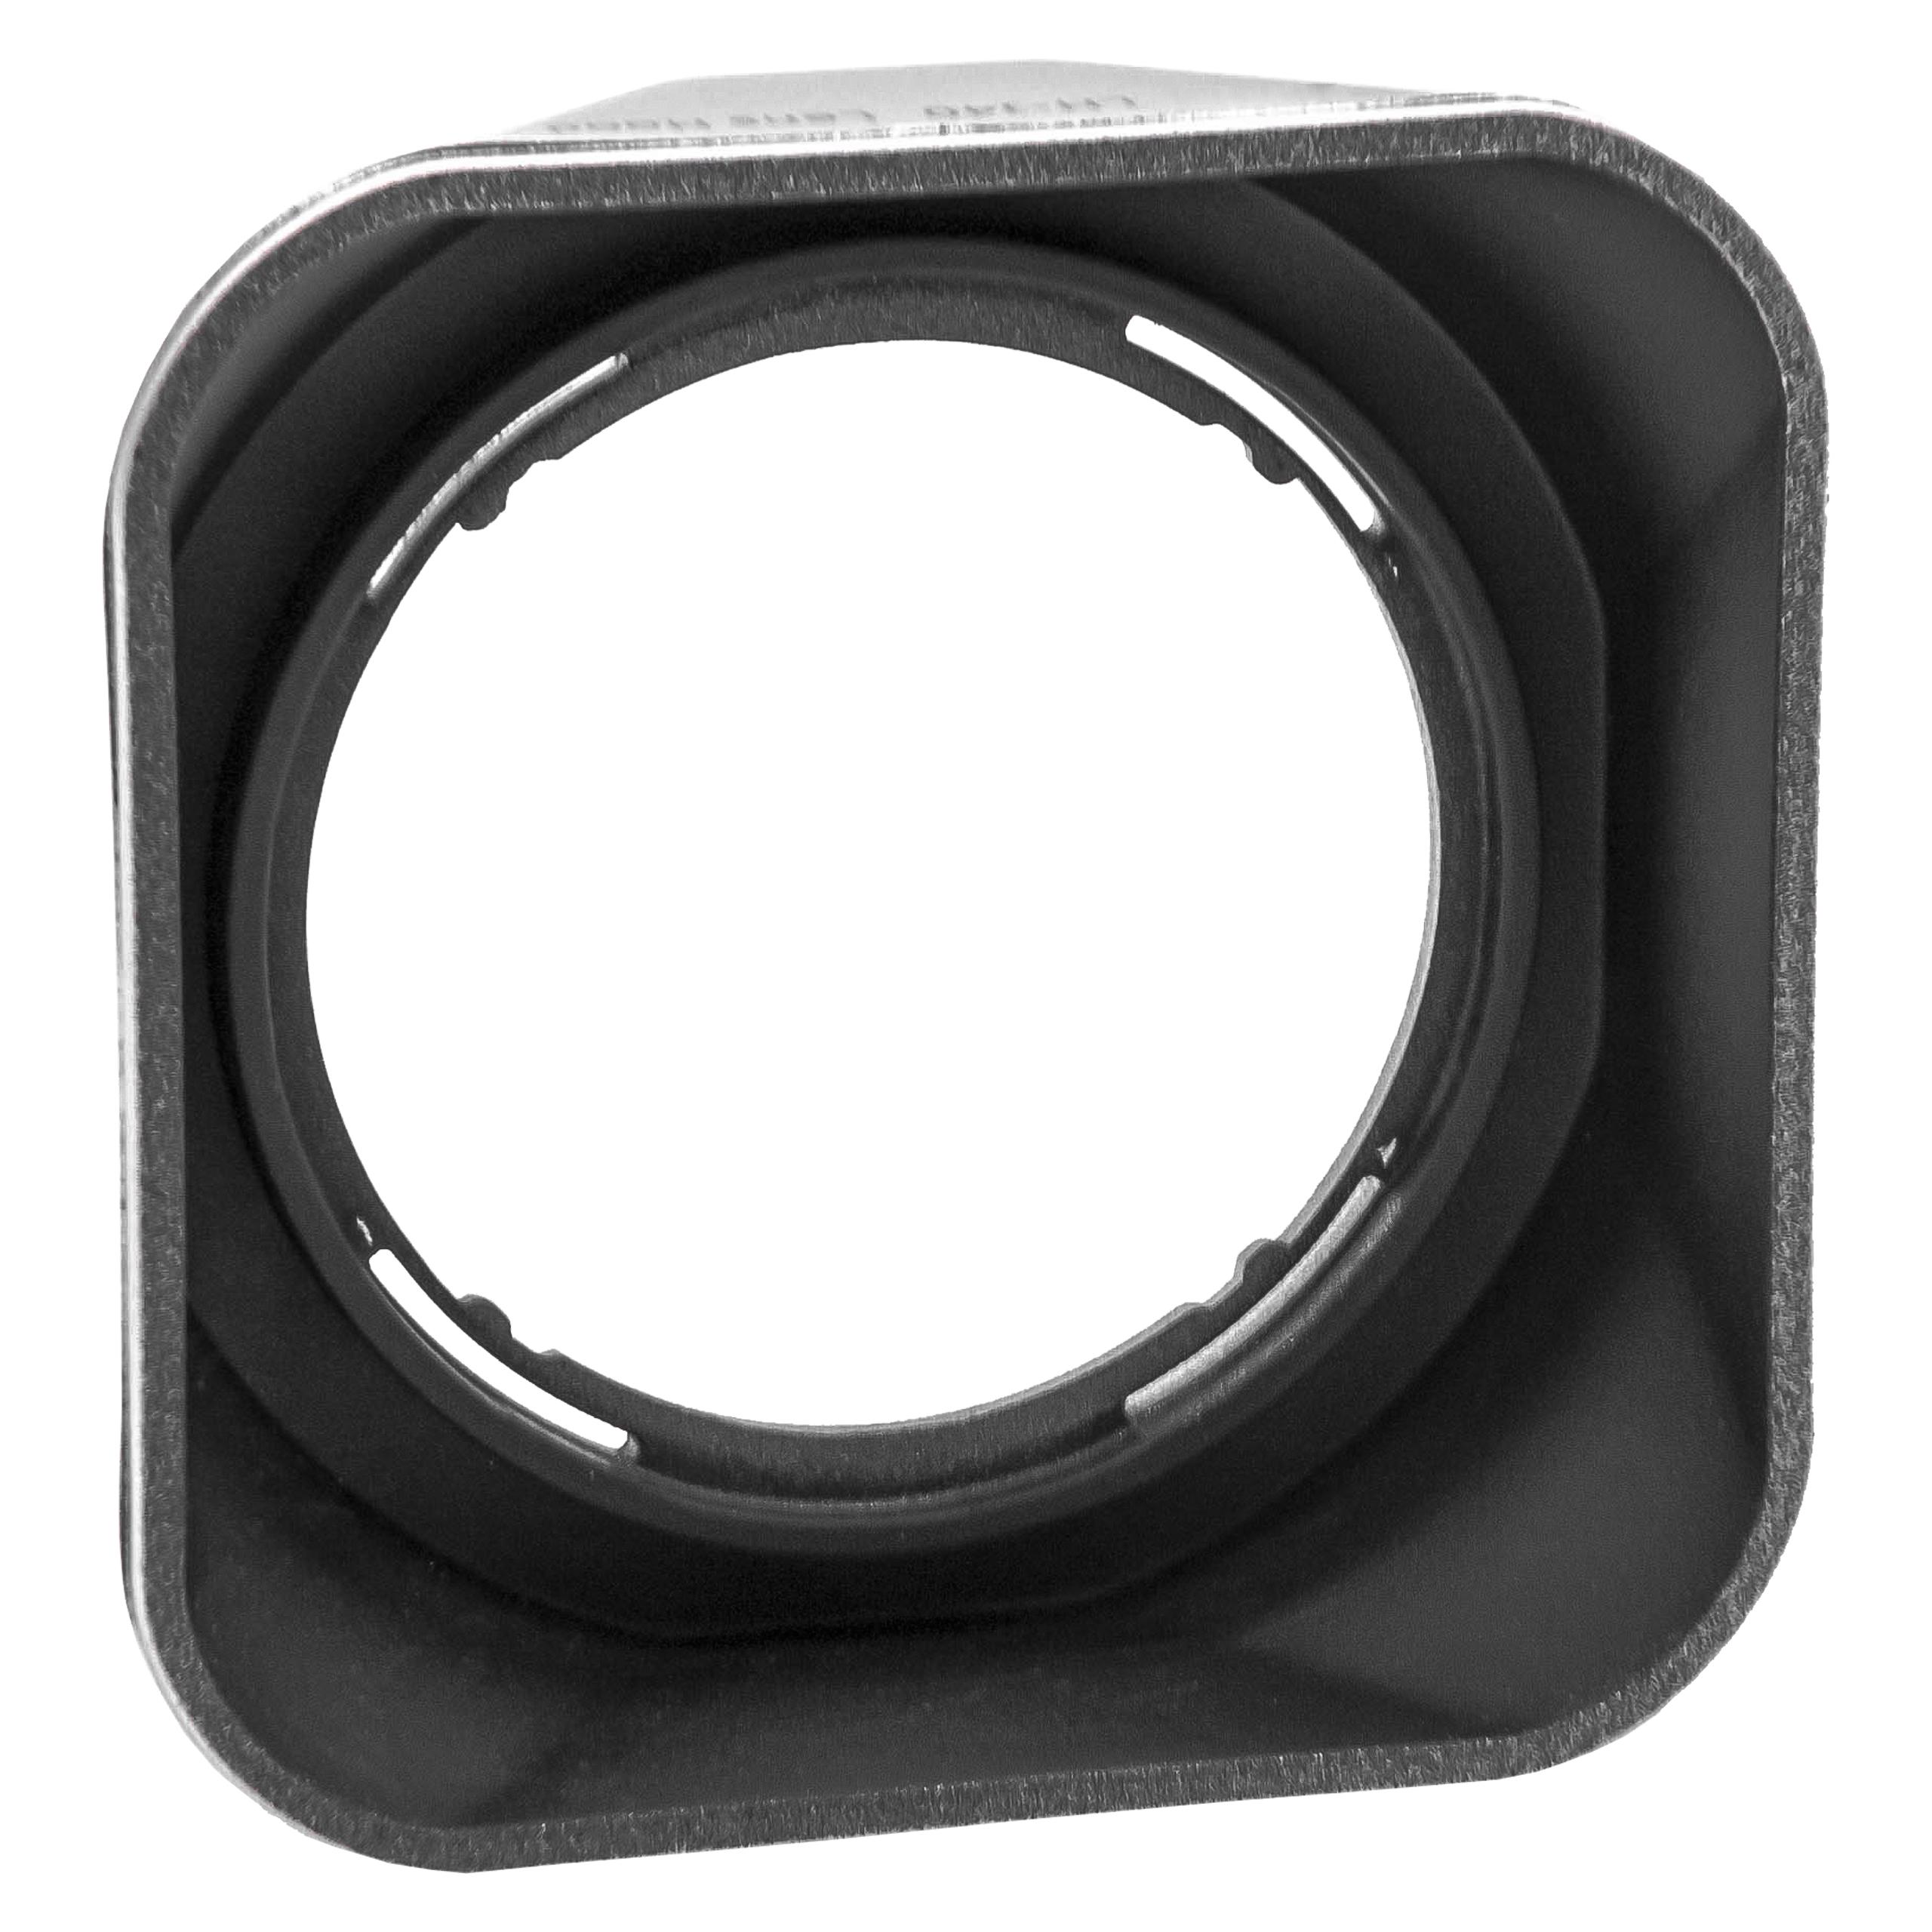 Lens Hood as Replacement for Olympus Lens LH-40